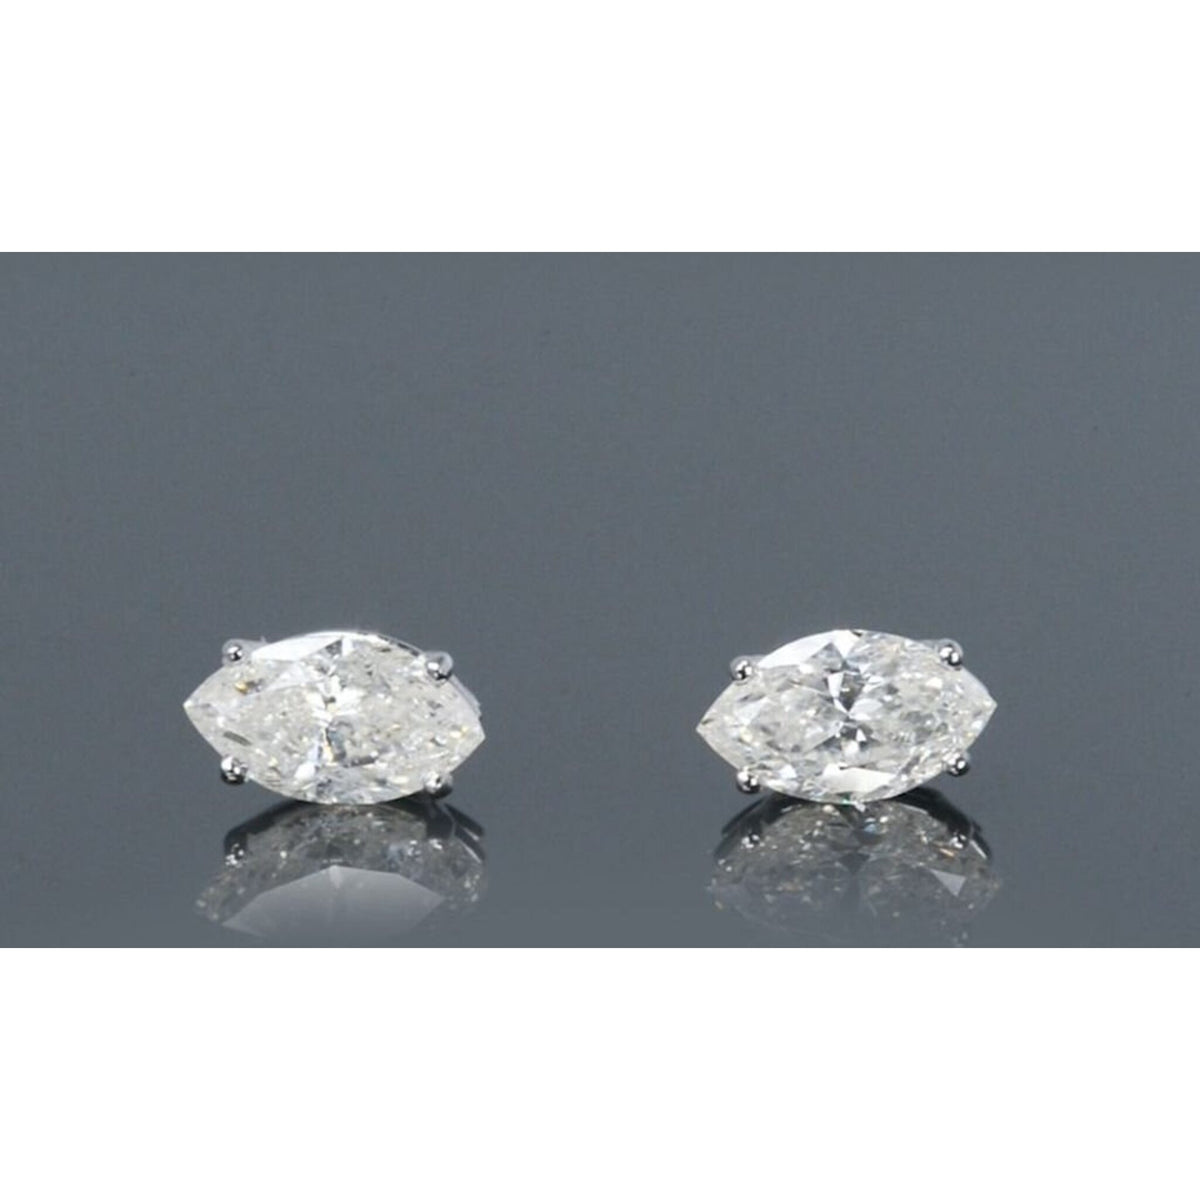 1.52 Carat Total Weight Marquise Diamond Stud Earrings